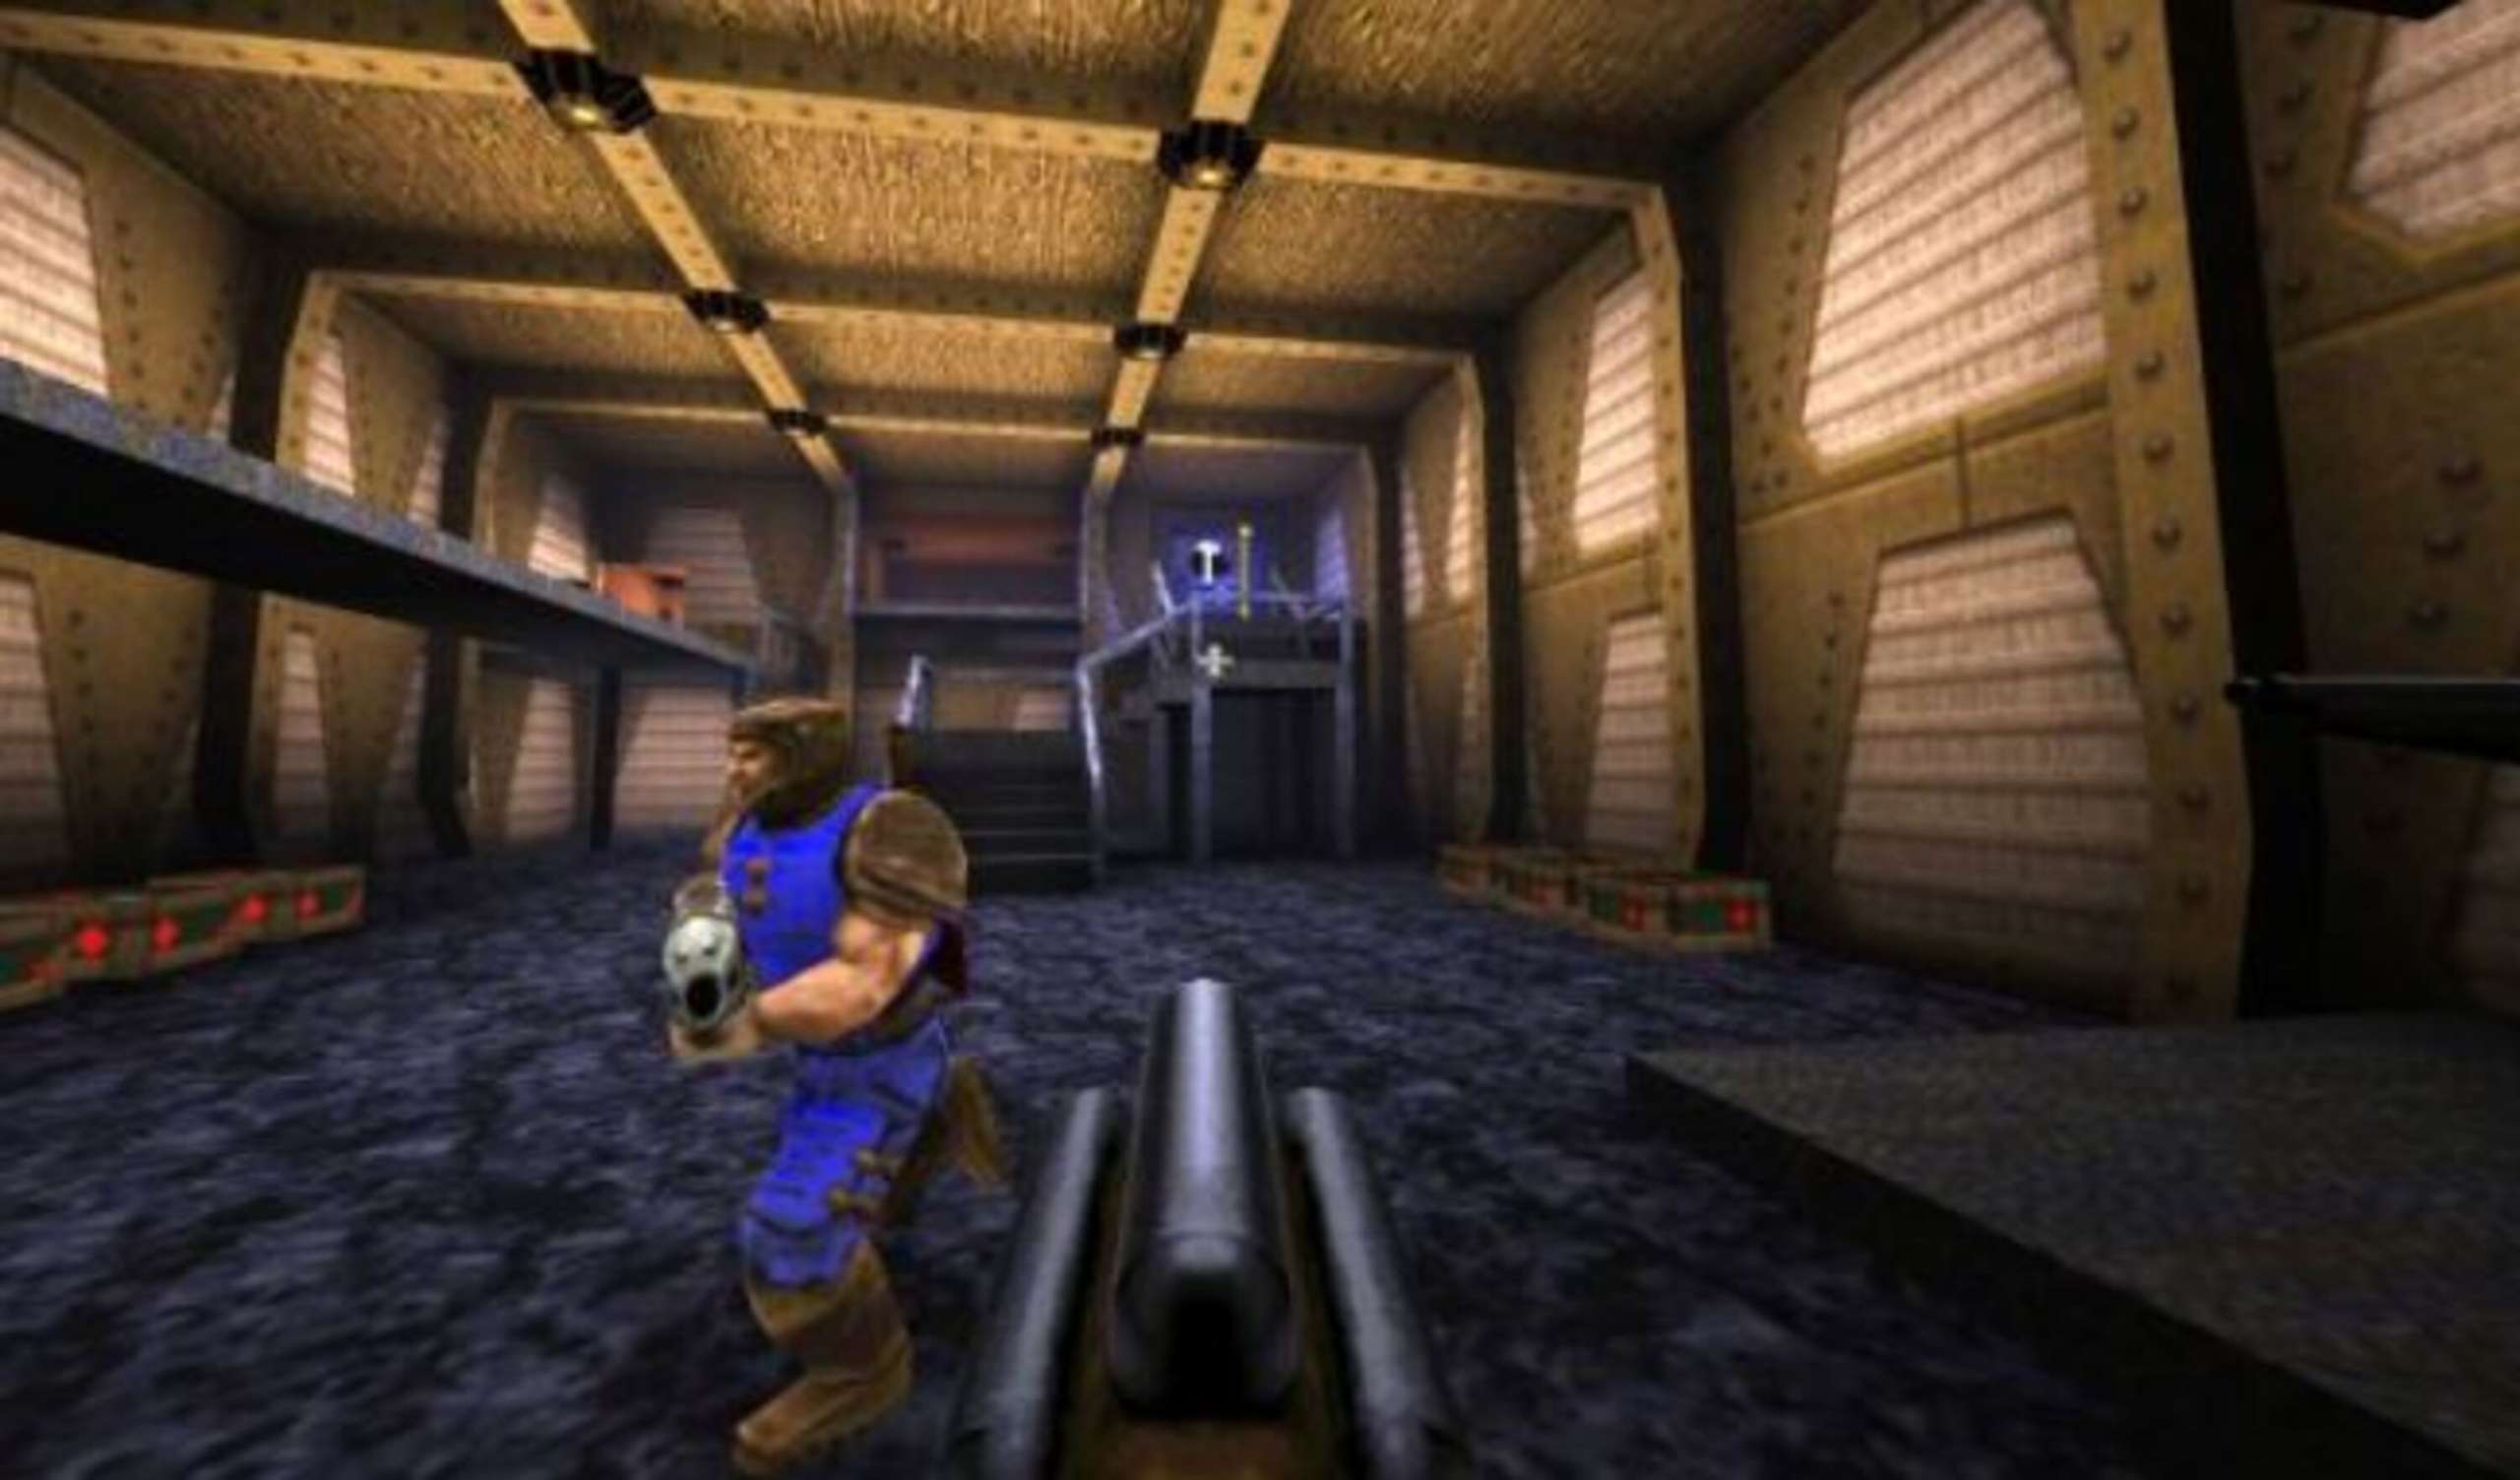 The Most Recent Update To Quake, One Of The Most Innovative First-Person Shooters Ever Created Along With Doom, Brings Back A Well-Liked Feature